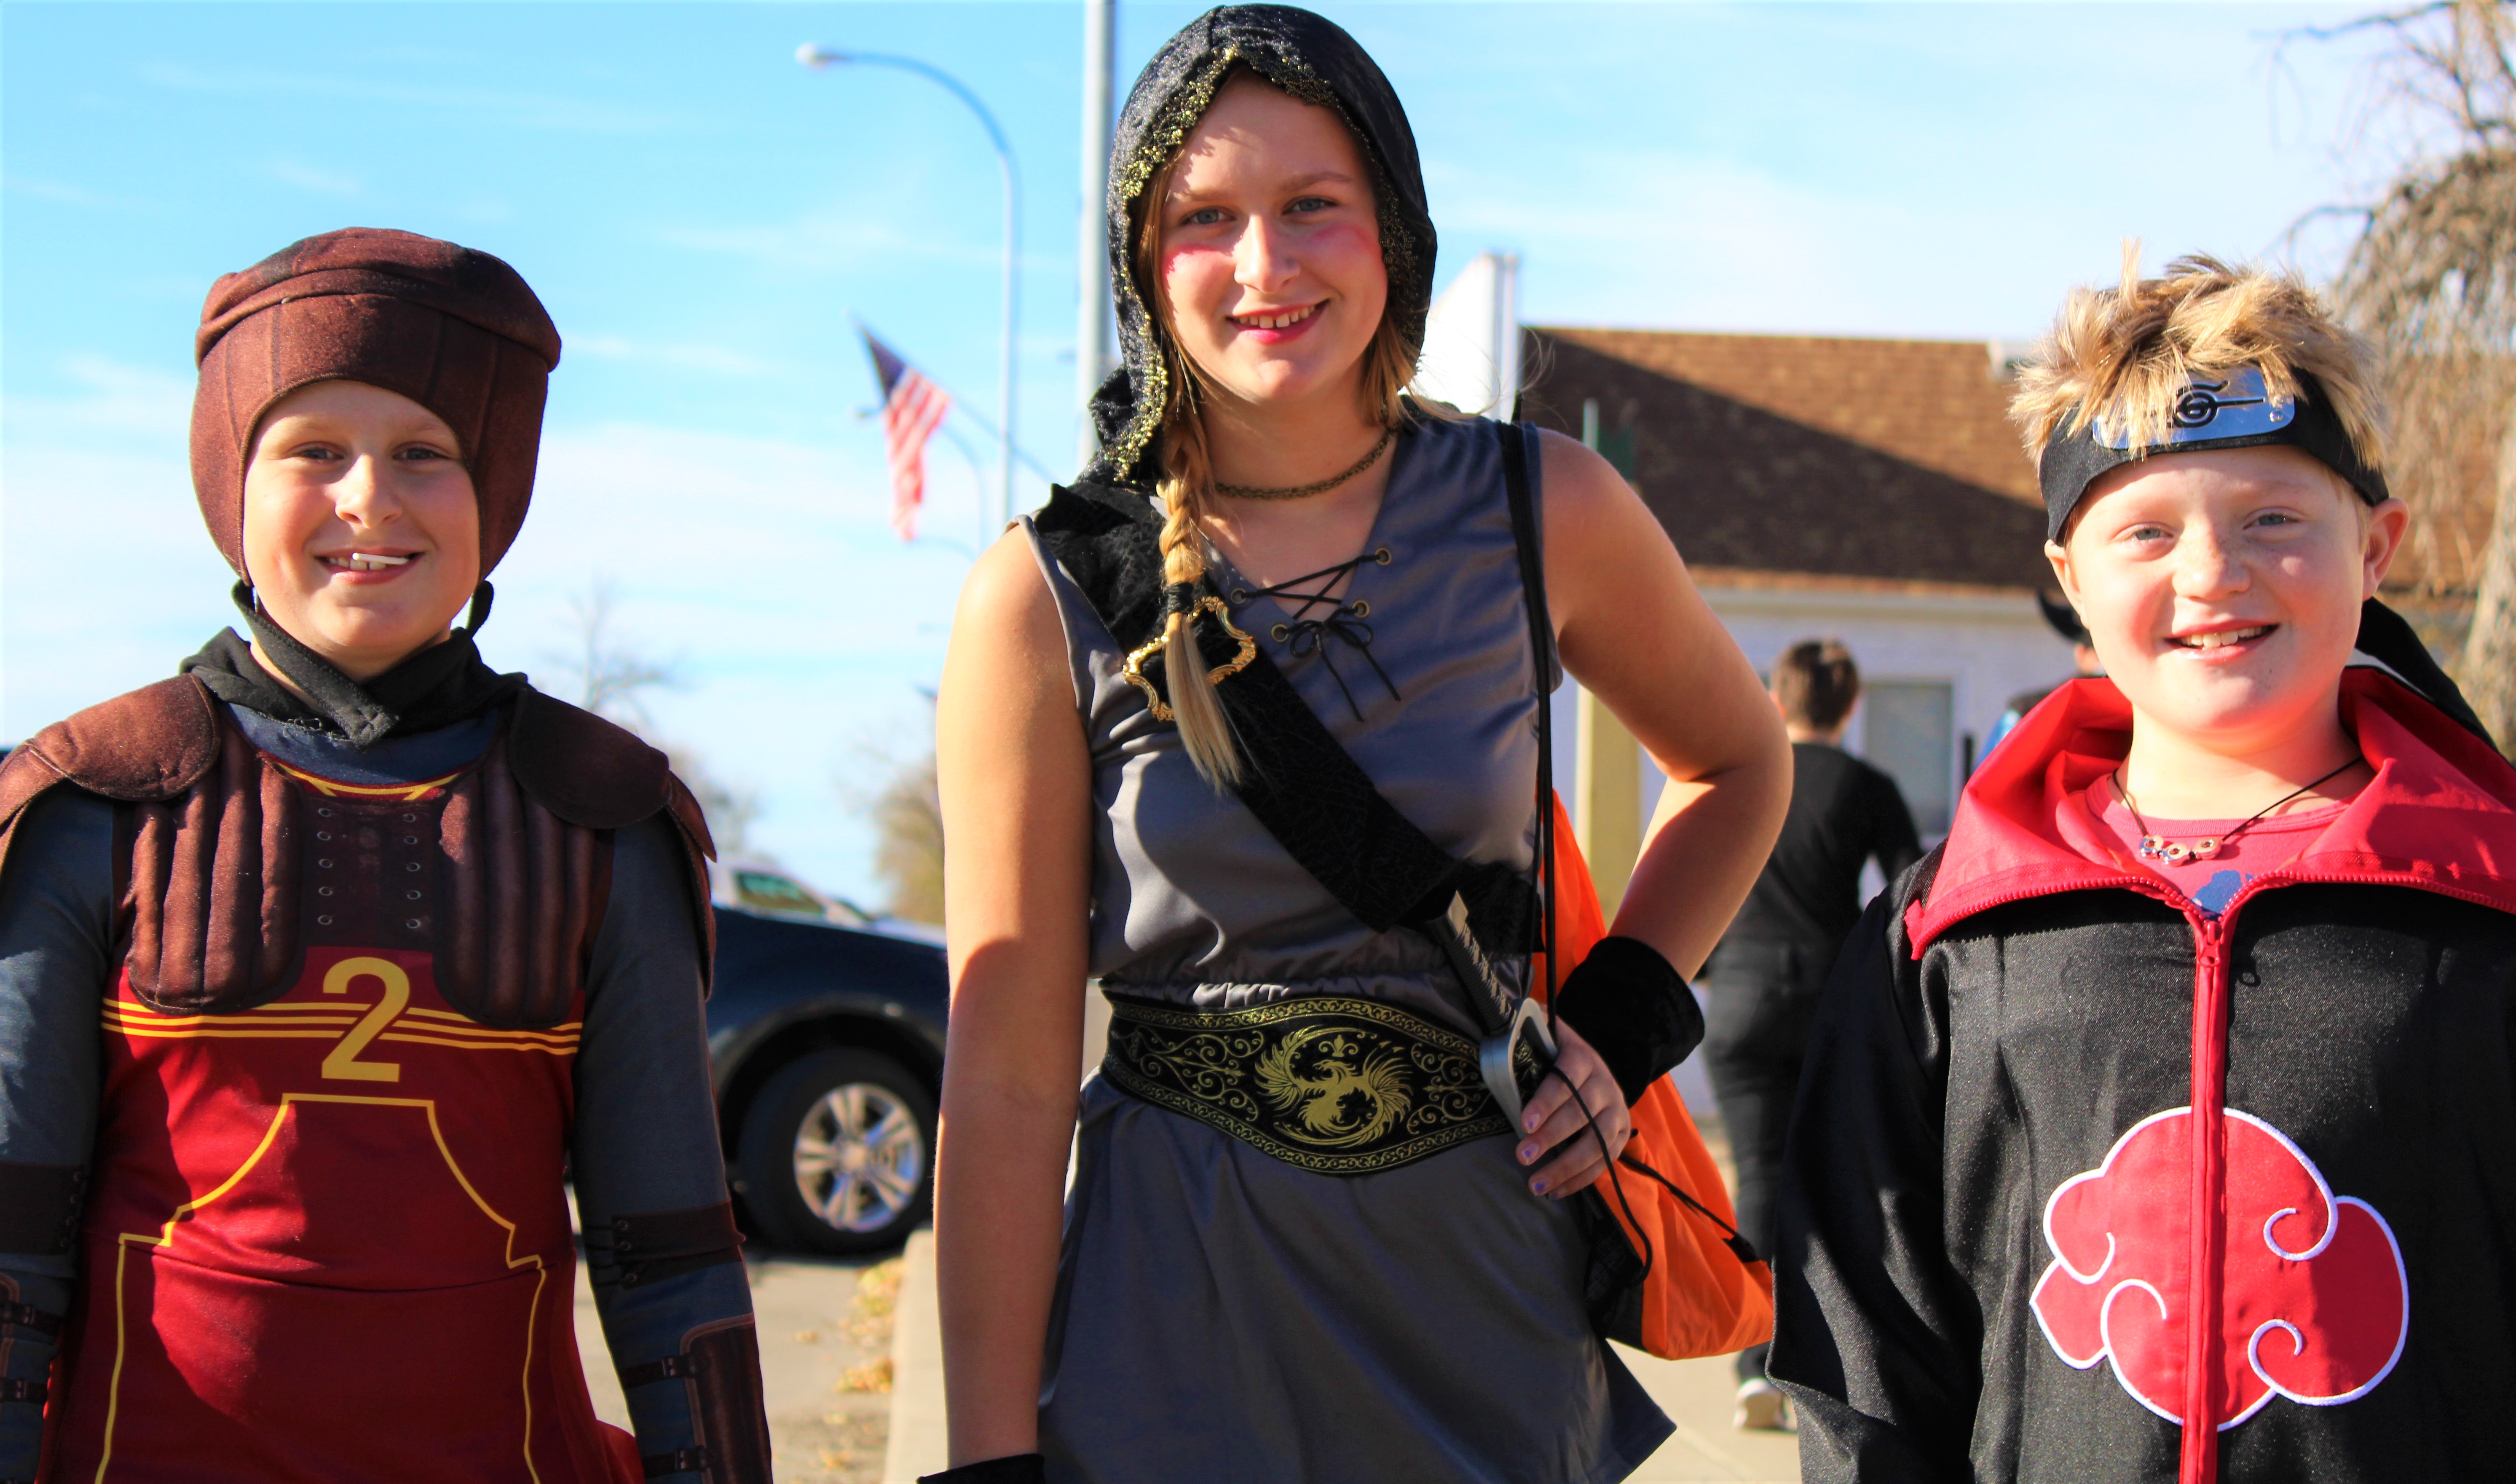 Youngsters come dressed to impress at Washburn’s Candy Caravan festivities